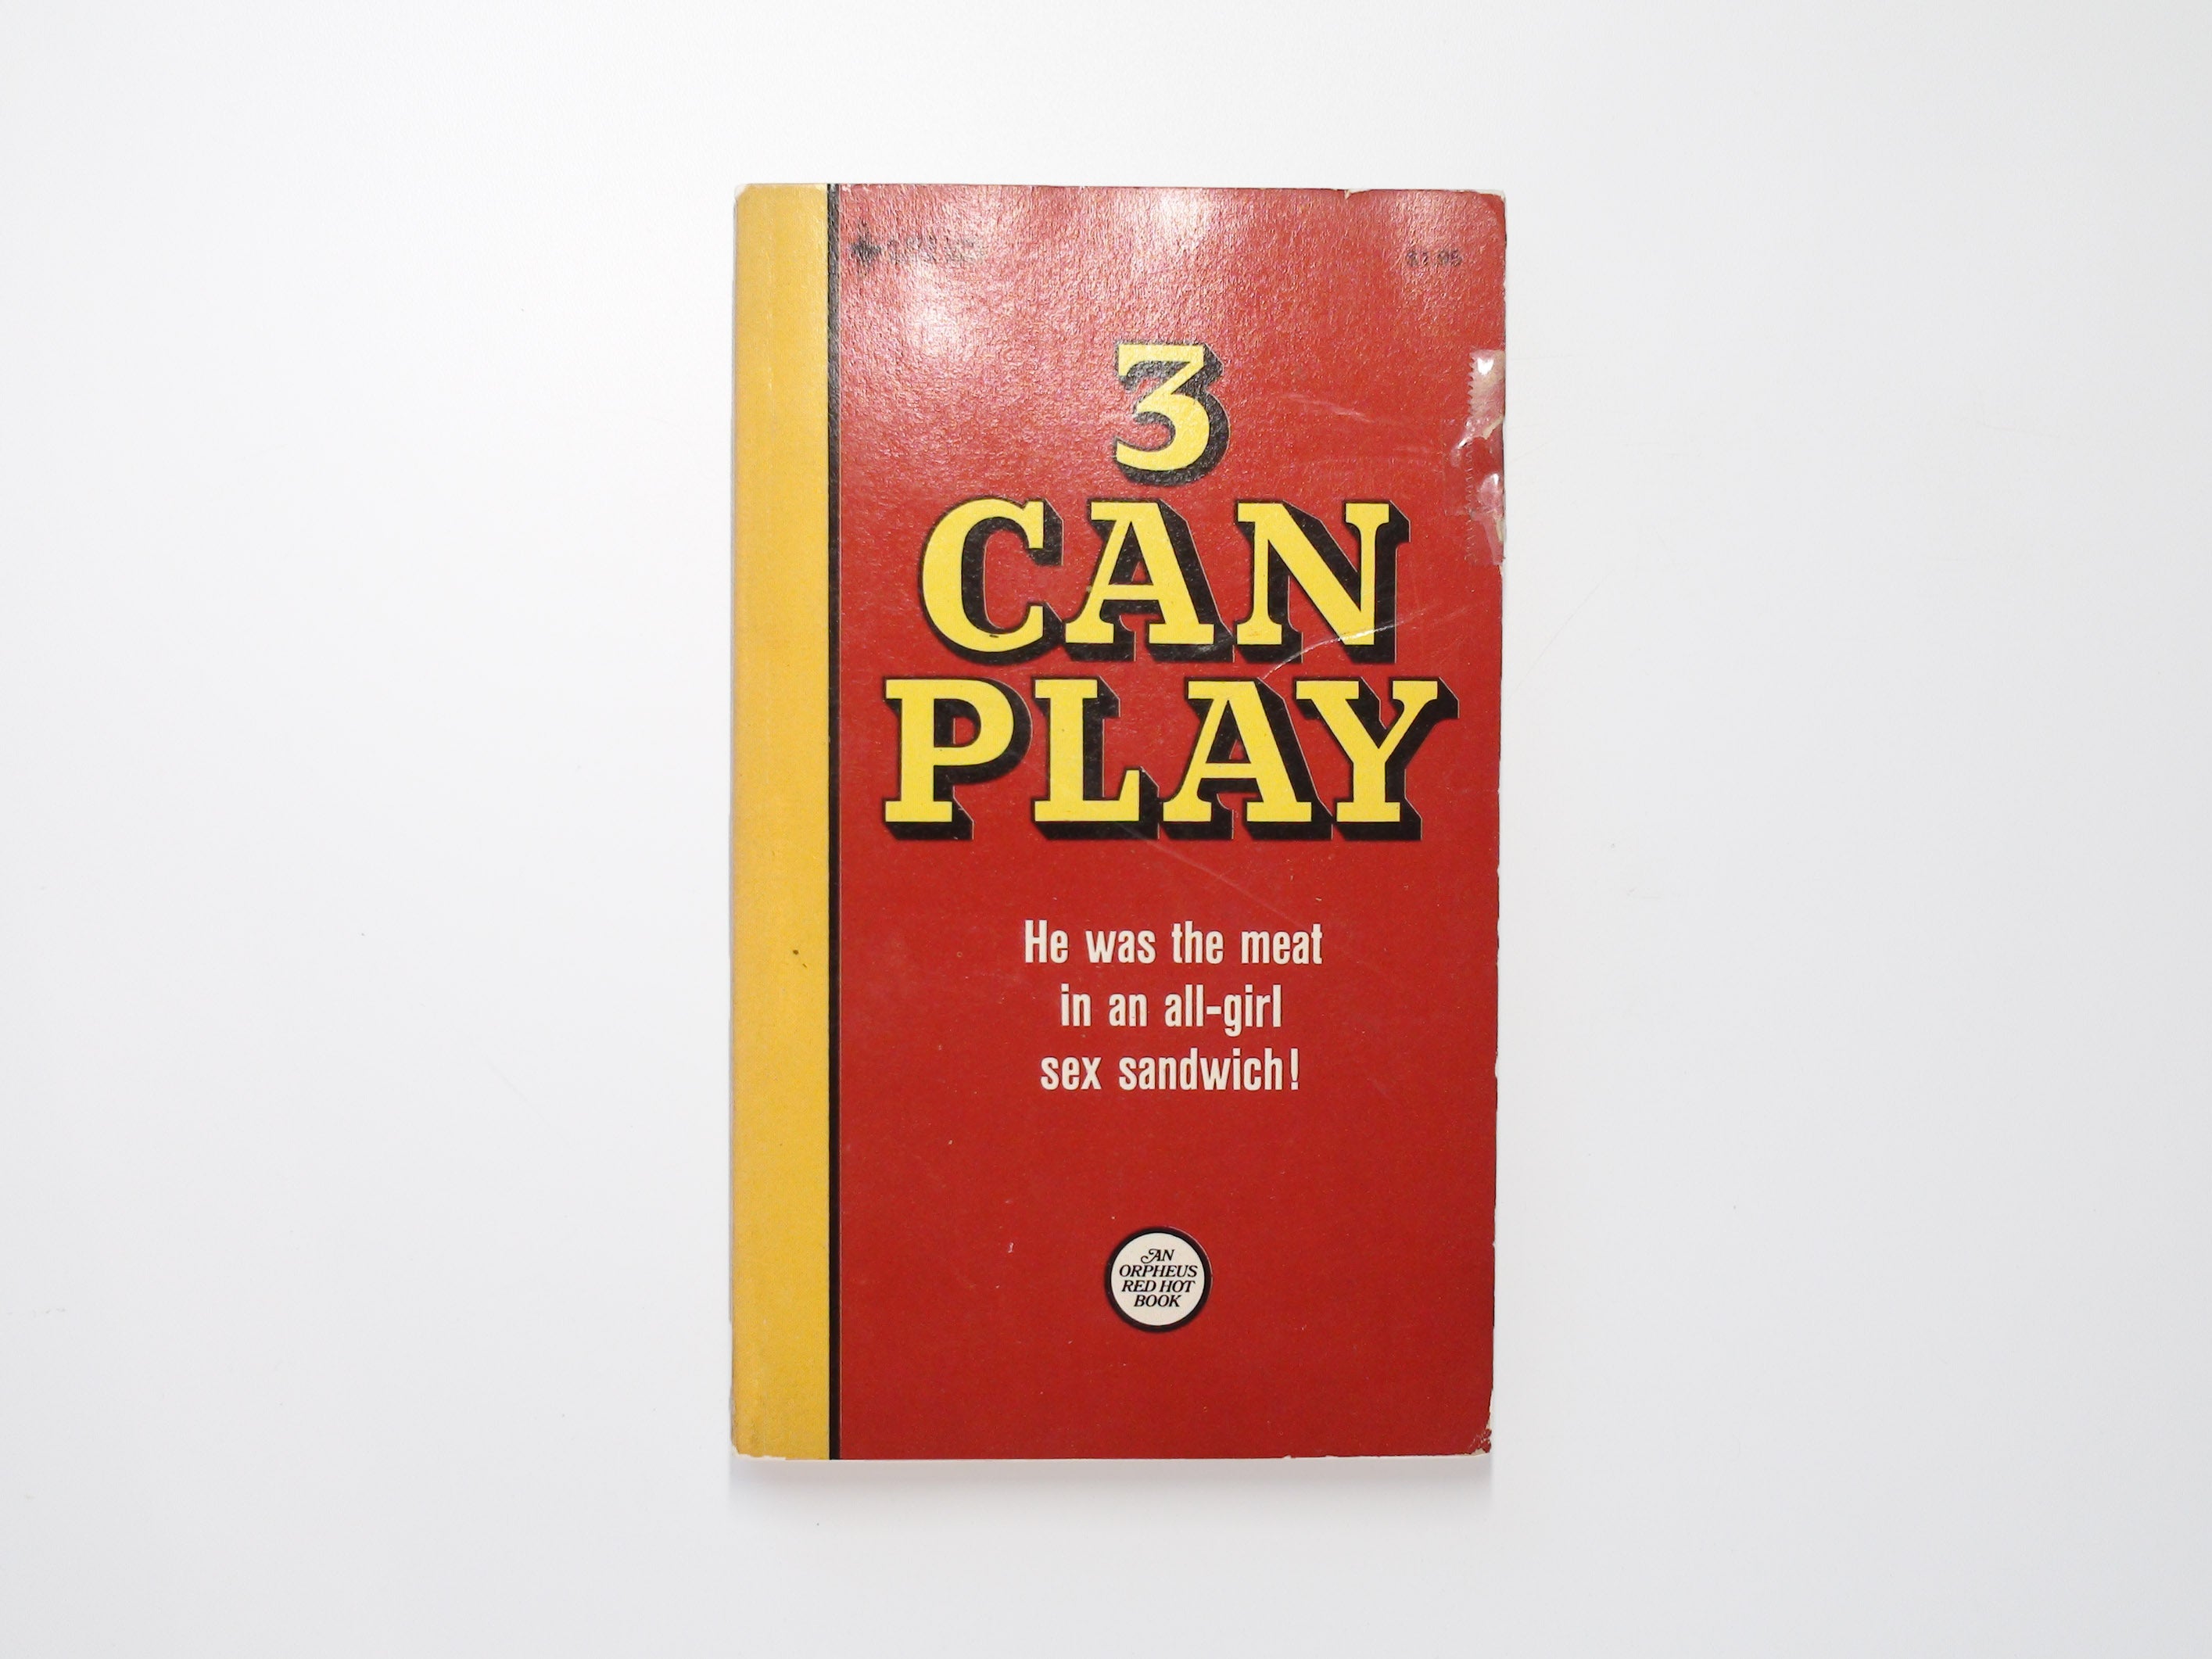 3 Can Play!, by Michael North, Orpheus Series, Erotica, Bee-Line Book, 1972